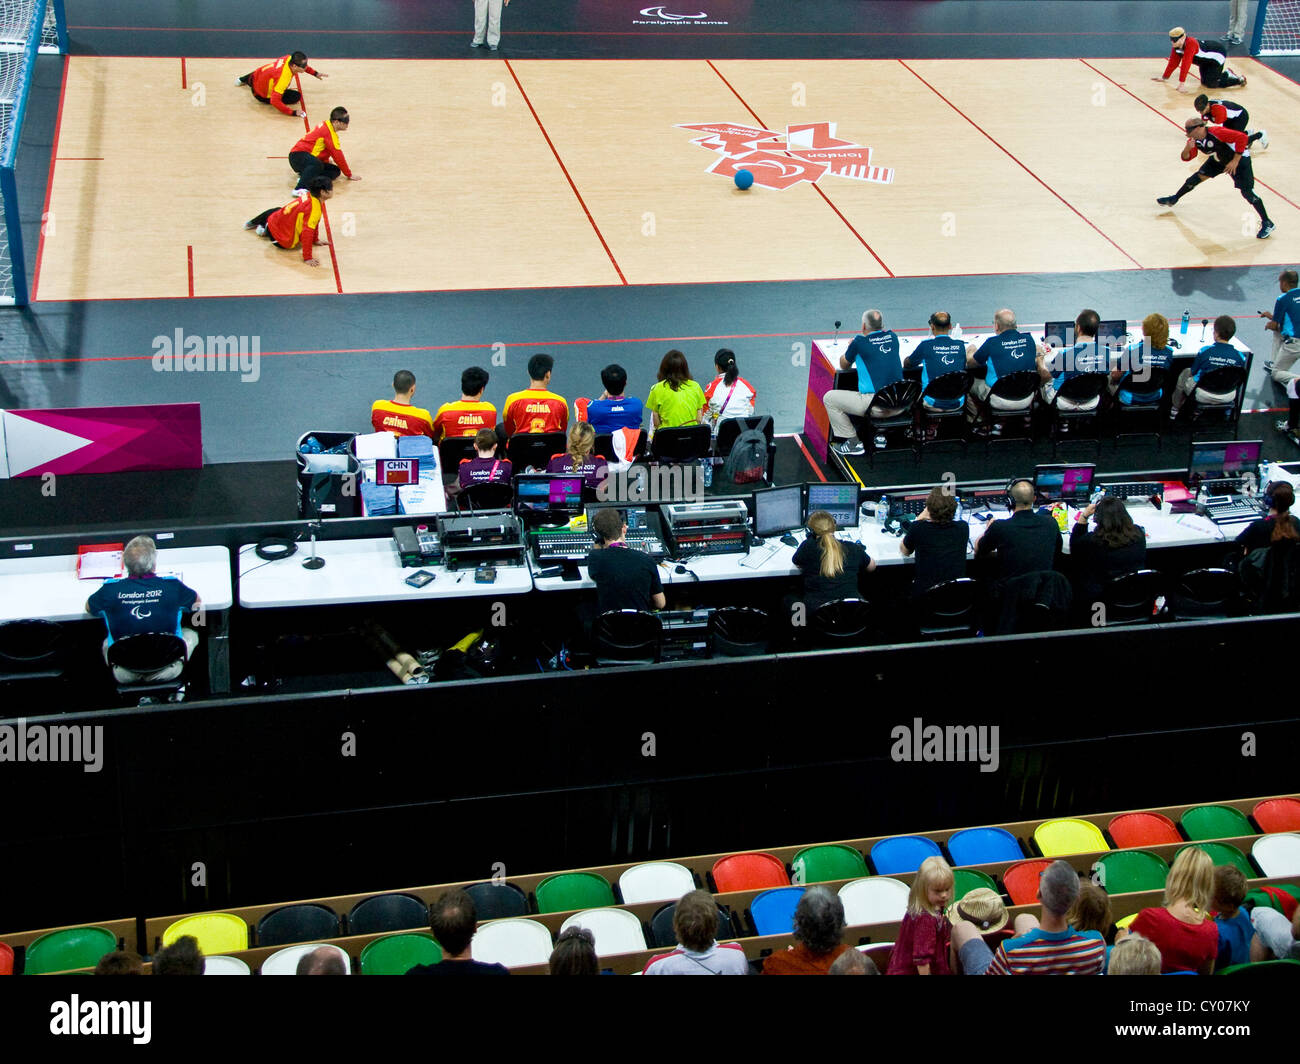 Goal ball match between Chinese & Canadian men in Copper Box at London 2012 paralympic Games England Europe Stock Photo